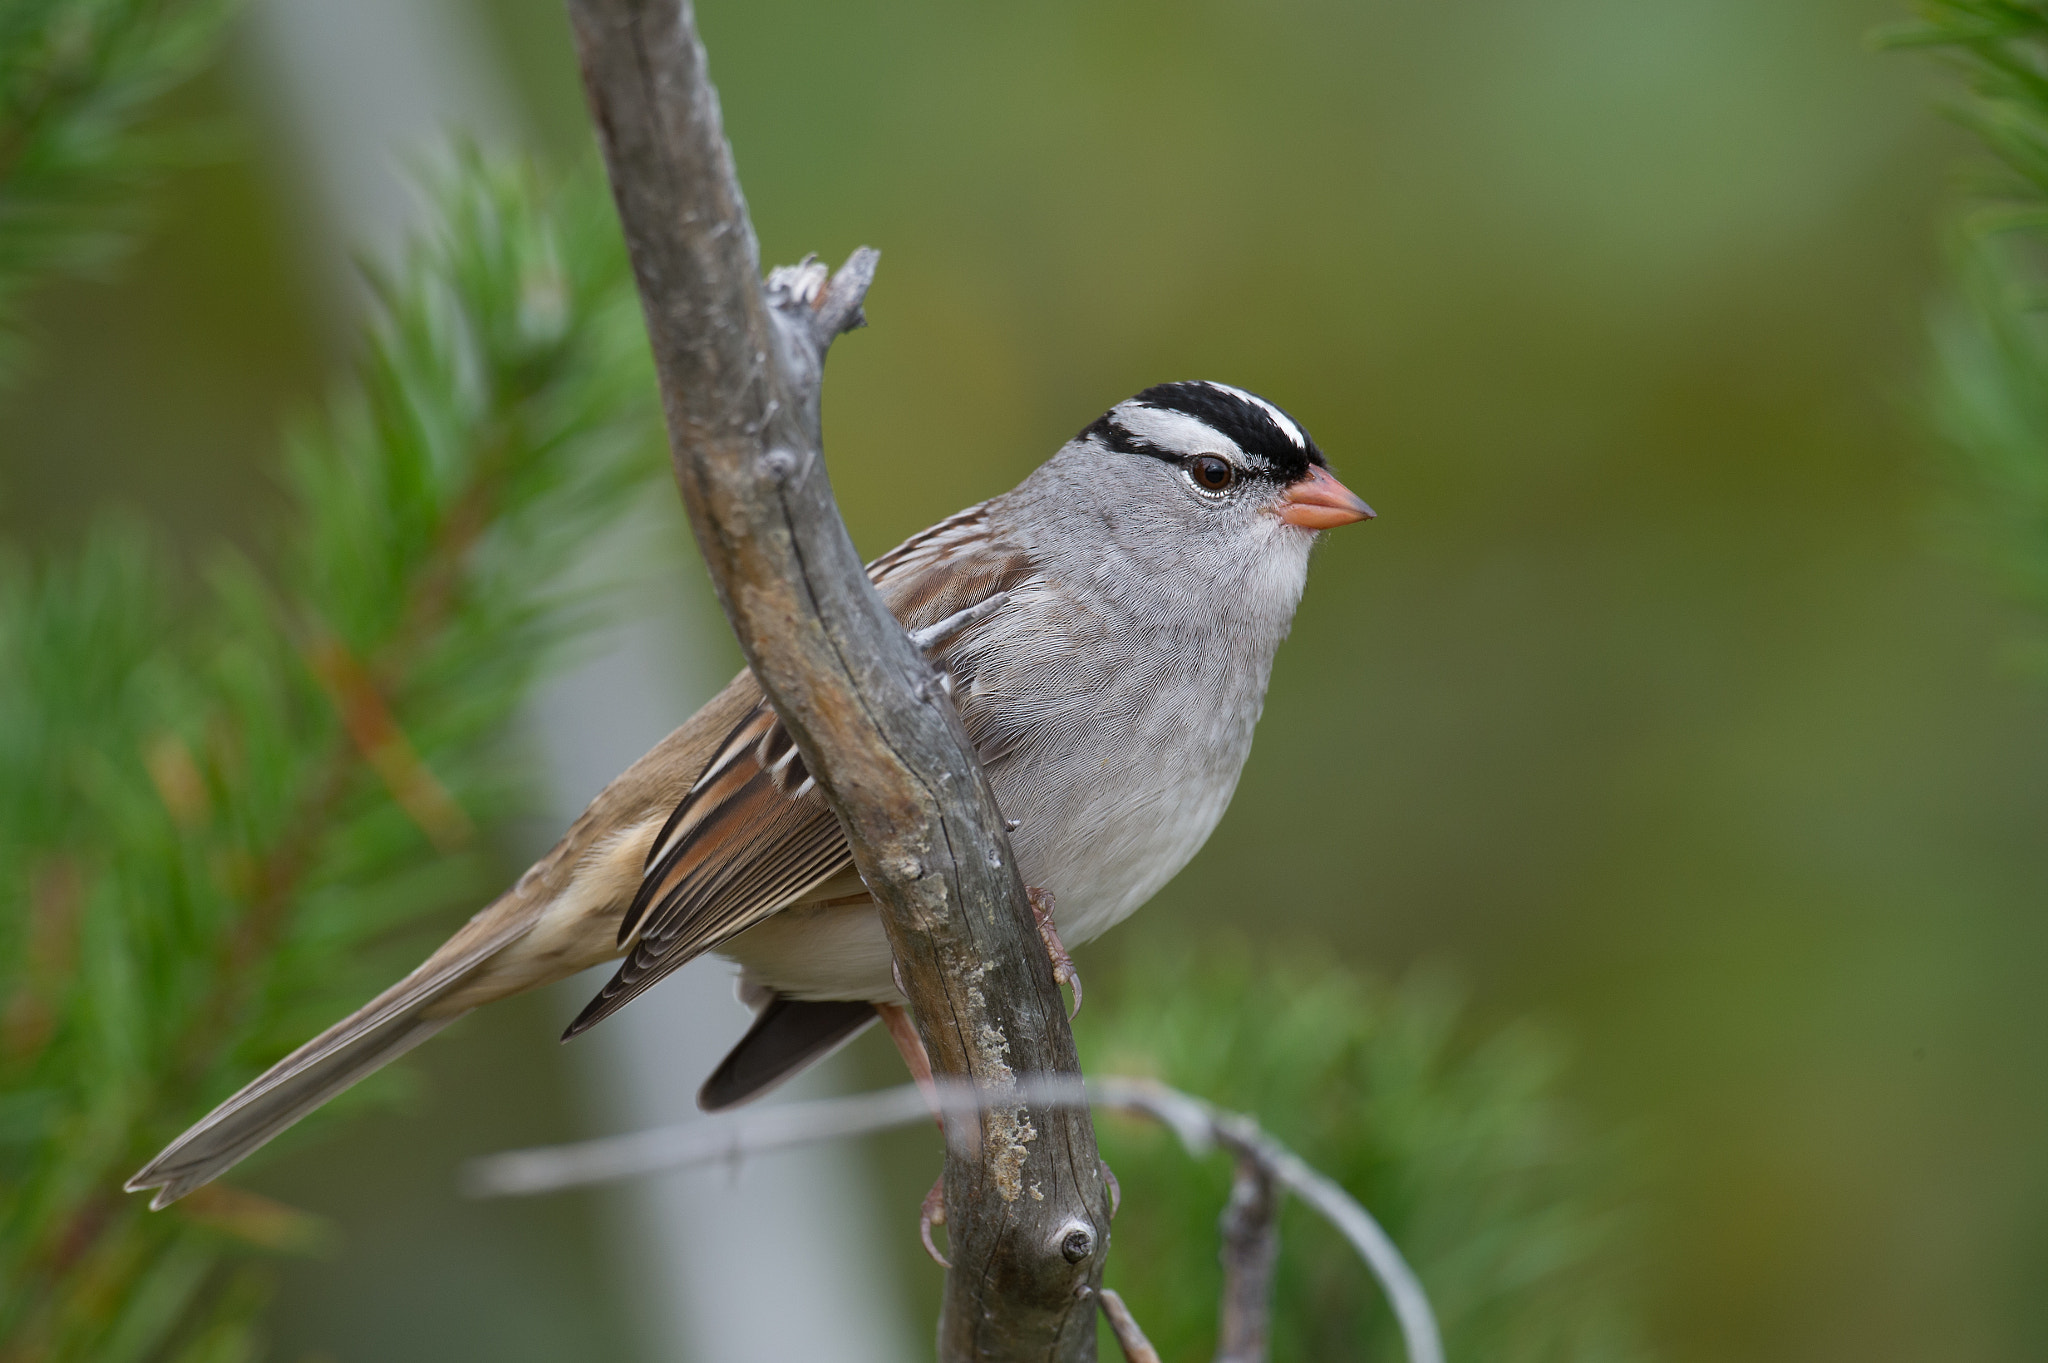 Nikon D4 sample photo. Bruant a couronne blanche, white-crowned sparrow photography